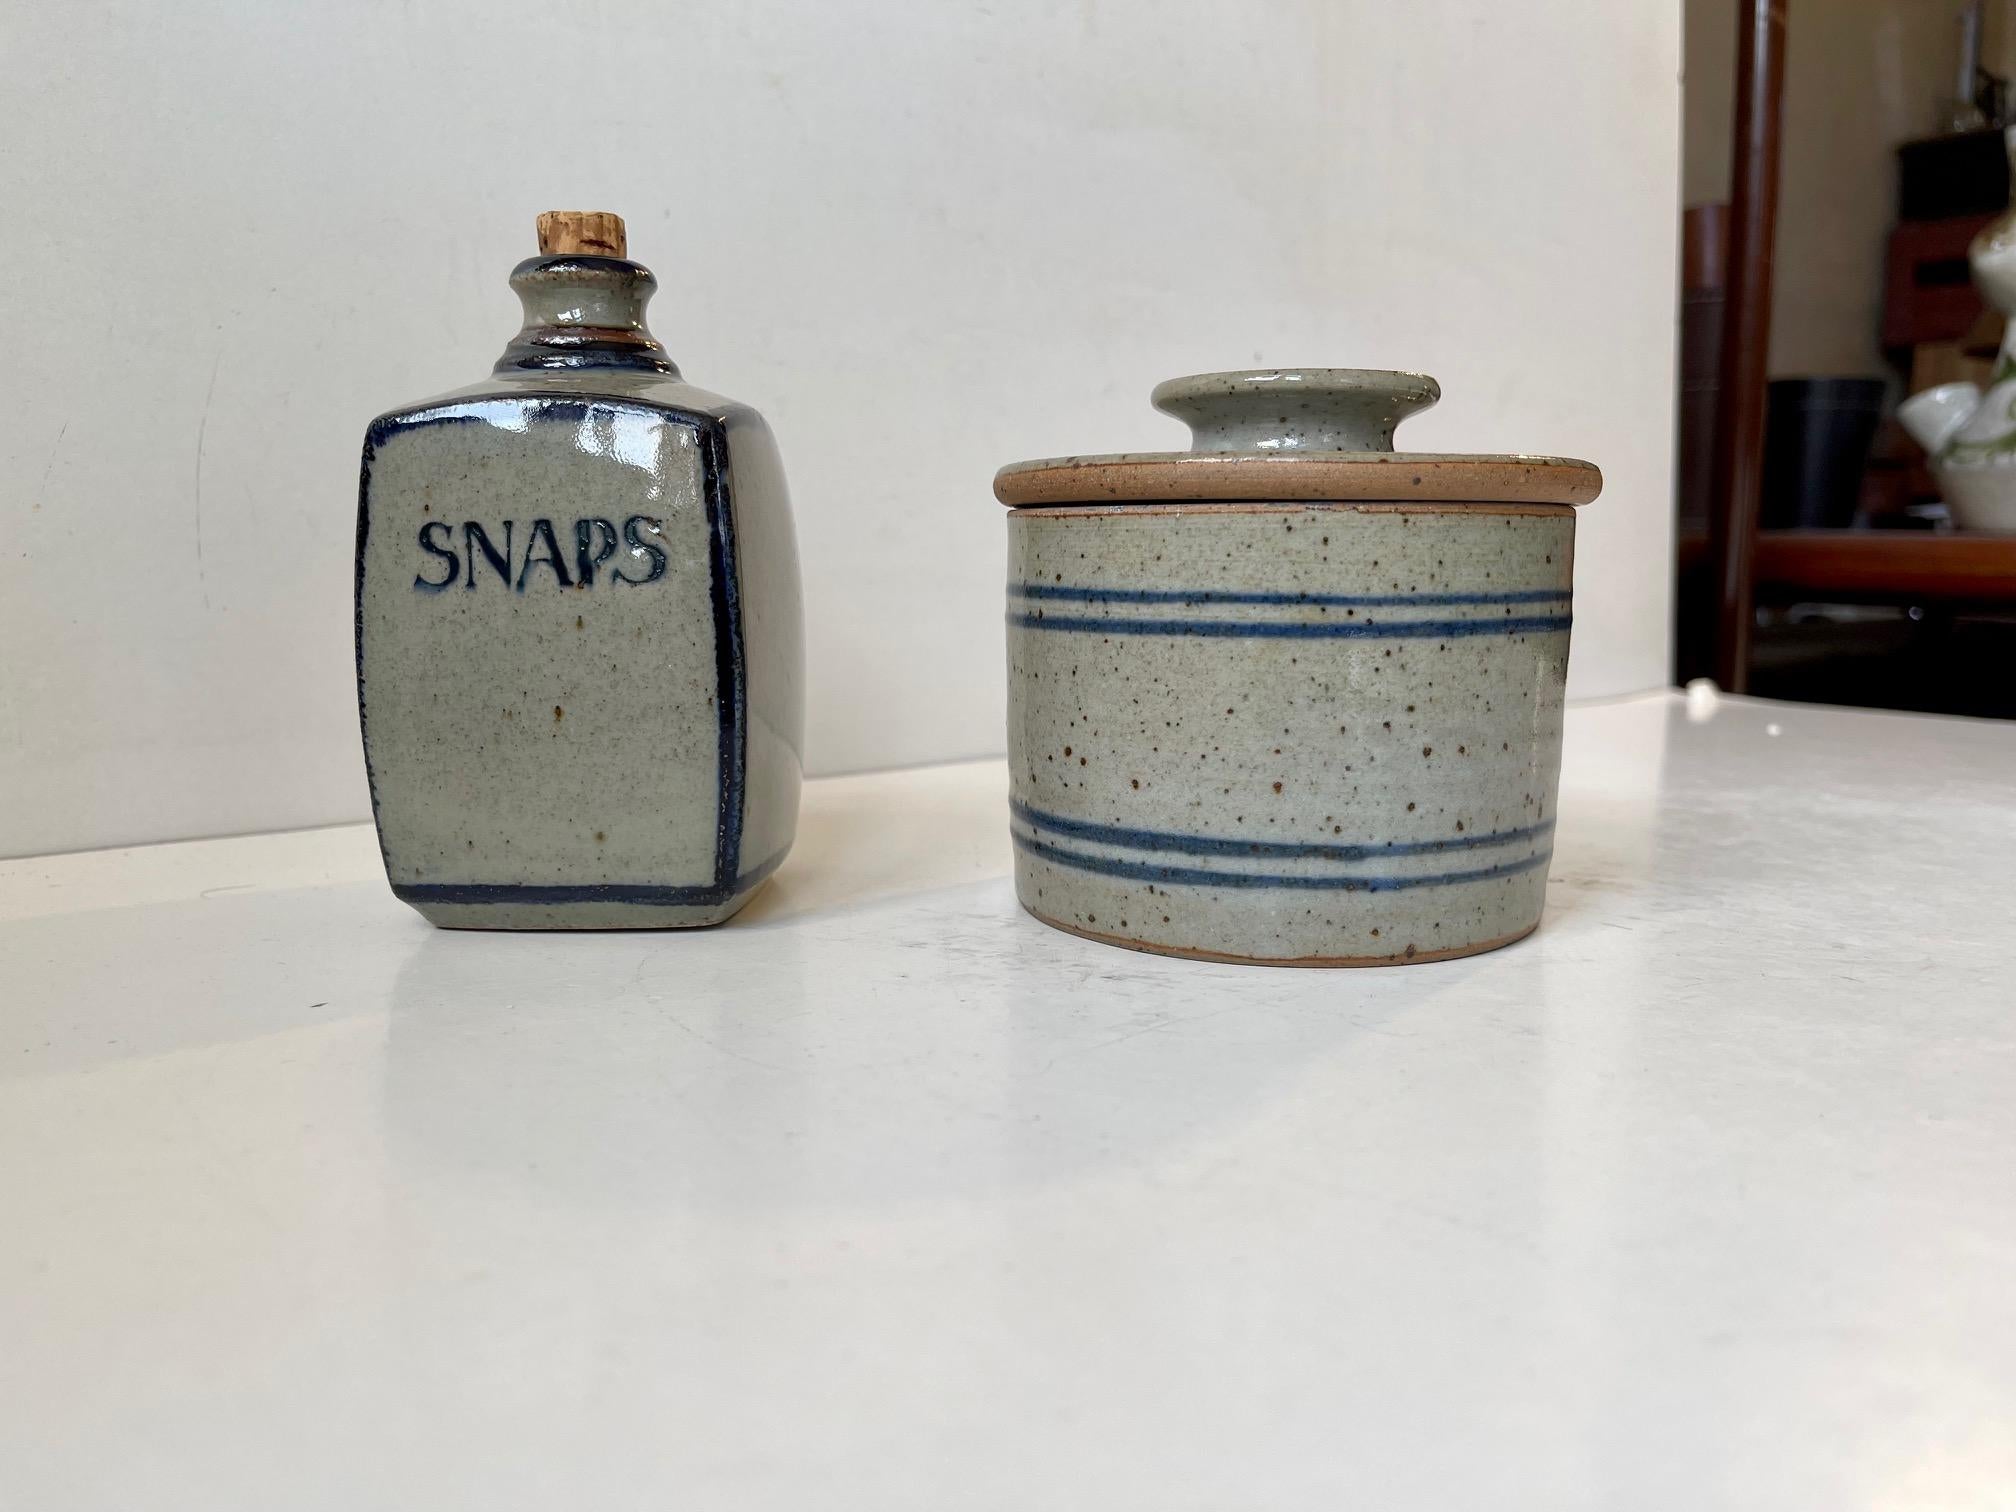 Two matching pieces from Knabstrup Atelje. Studio-made in Denmark circa 1970. The set consist of af small brandy decanter with cork stopper and a lidded jar. Snaps is the Danish equivalent of brandy. Scandinavian midcentury modern farmhouse style.